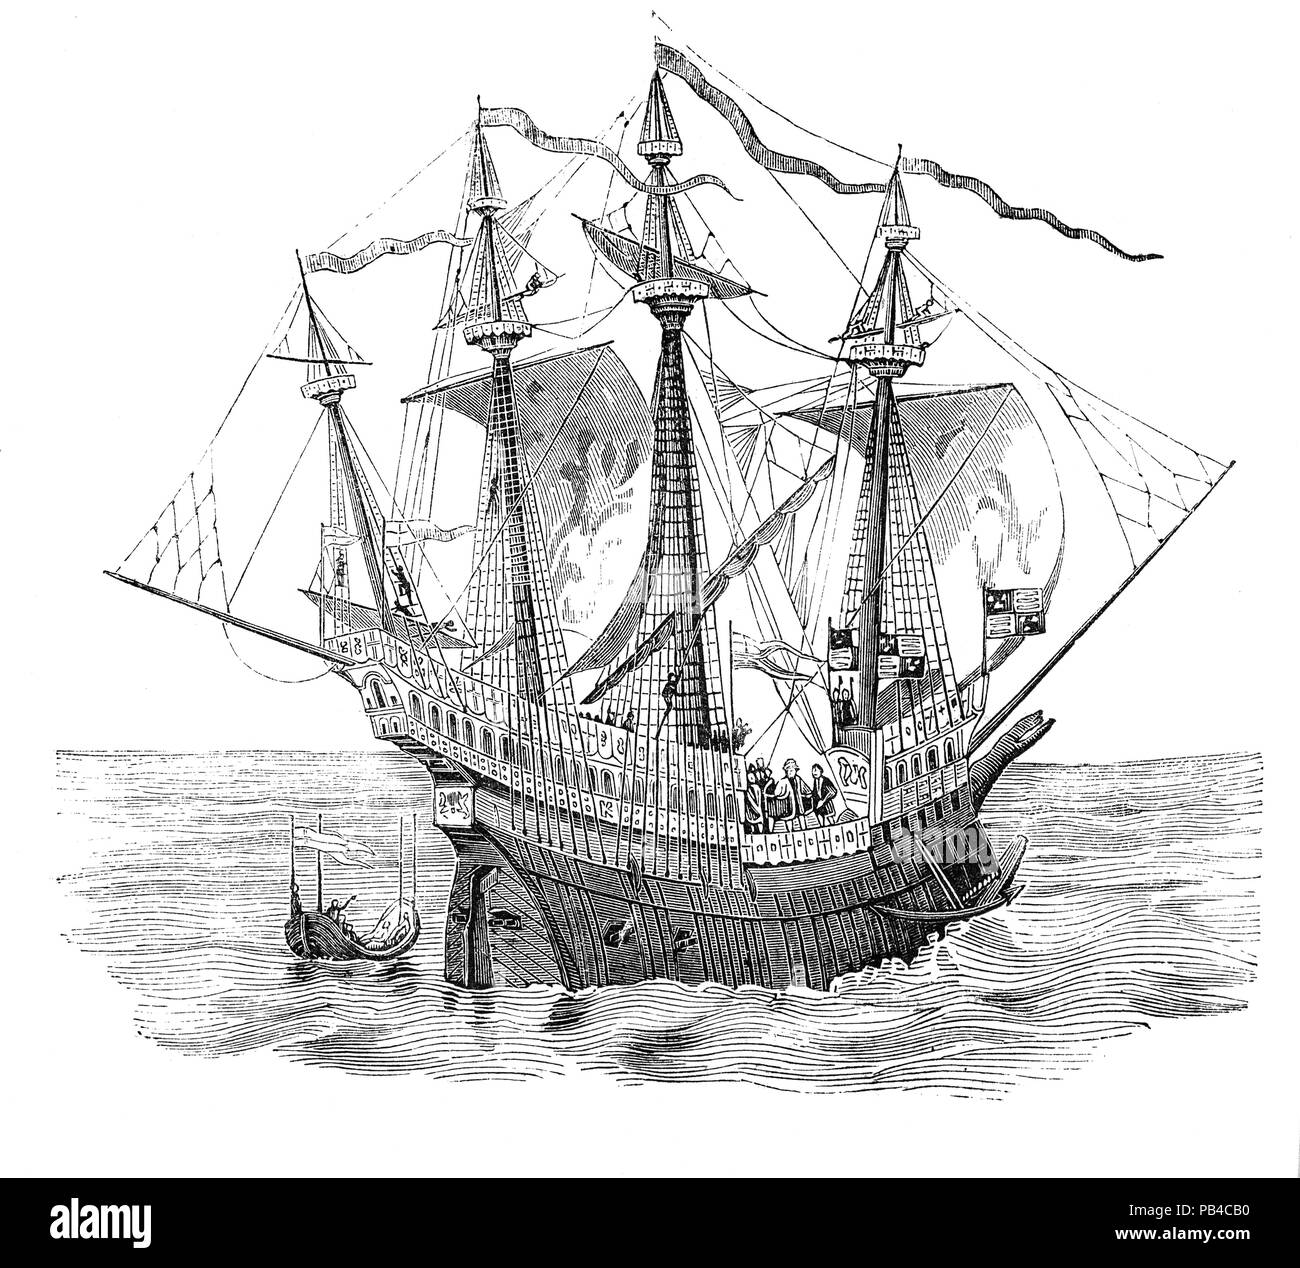 'Henry Grace à Dieu', also known as Great Harry, an English carrack was  Henry VIII's flagship with a crew of 700 to 1,000 men.  She was the first English two-decker and when launched around 1513 was the largest and most powerful warship in Europe and one of the first vessels to feature gunports, with twenty heavy bronze cannon, allowing for a broadside.  But early on it became apparent that the ship was top heavy, plagued with heavy rolling in rough seas and poor stability adversely affected gun accuracy and general performance as a fighting platform. Stock Photo